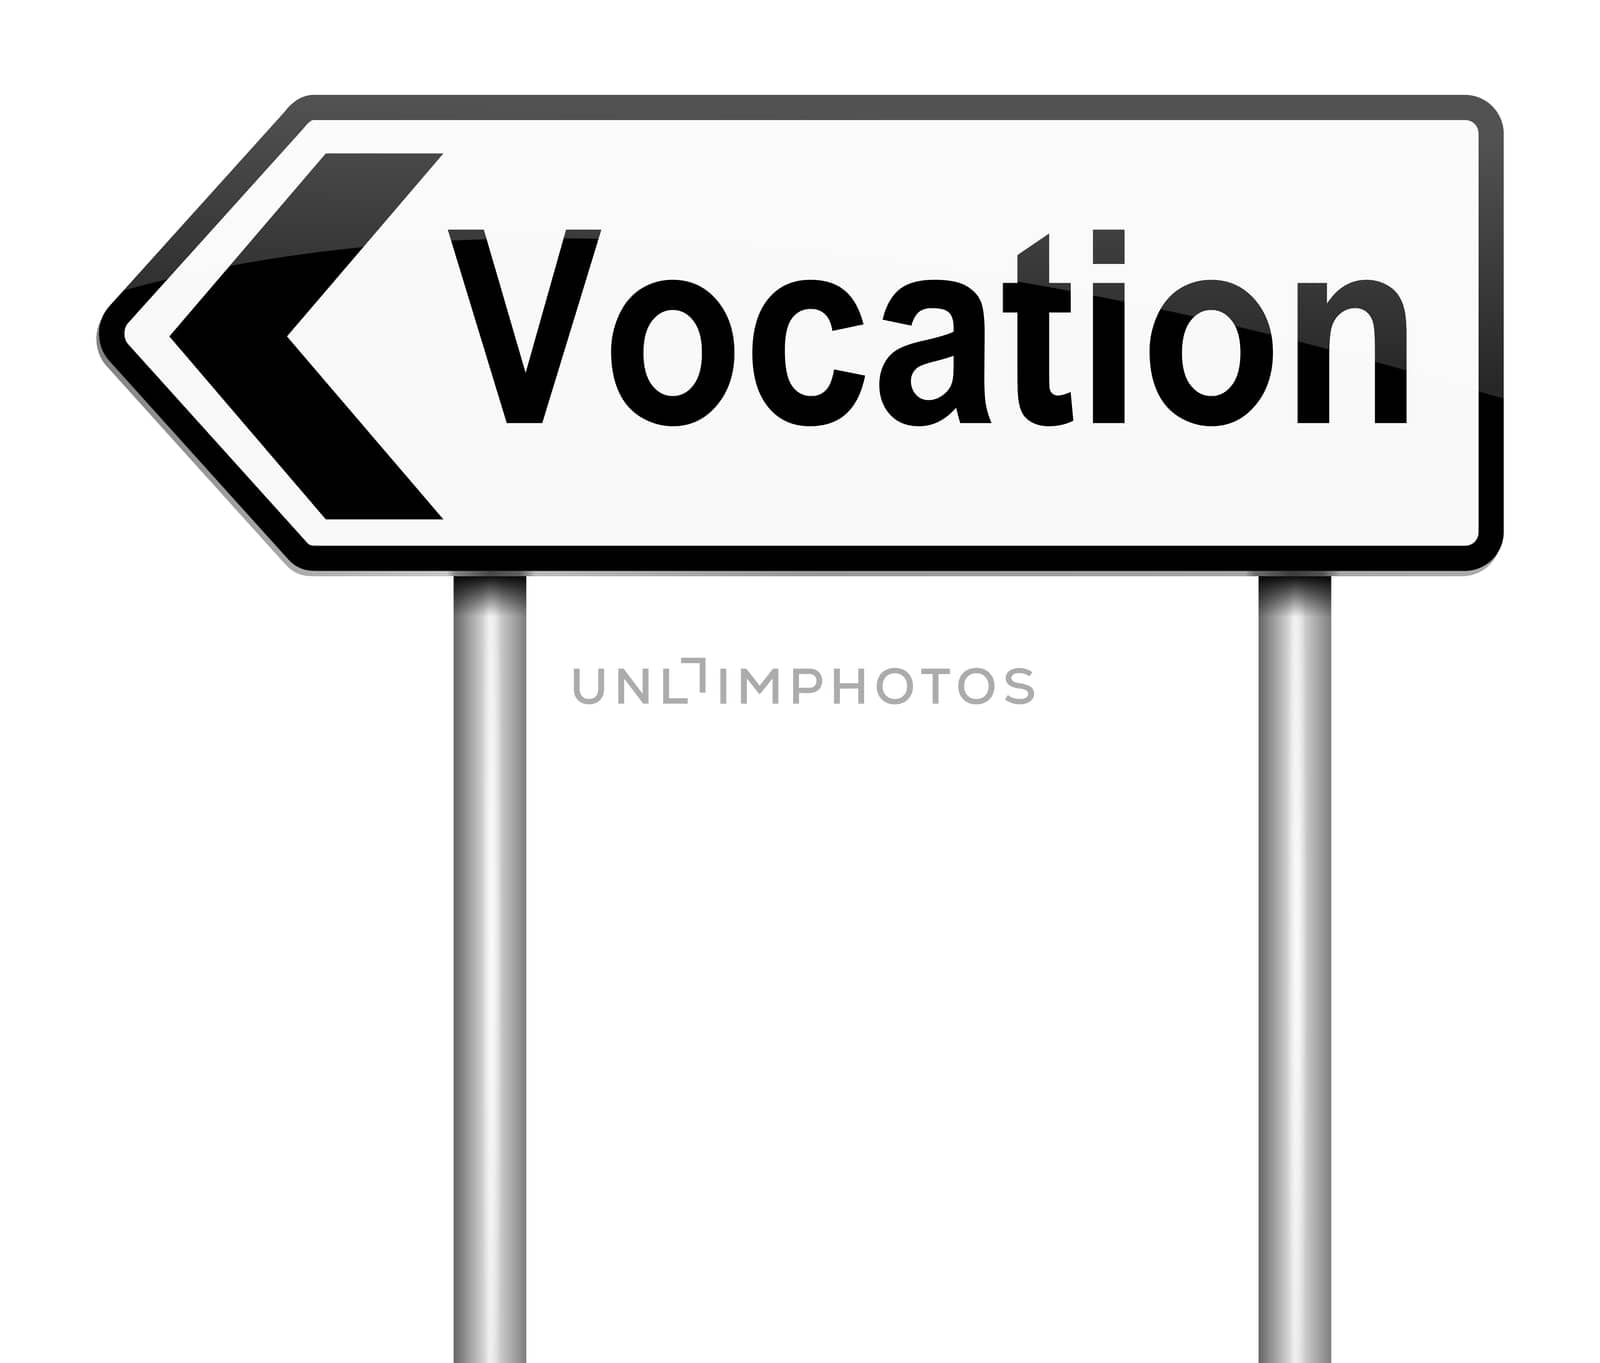 Illustration depicting a sign with a vocation concept.